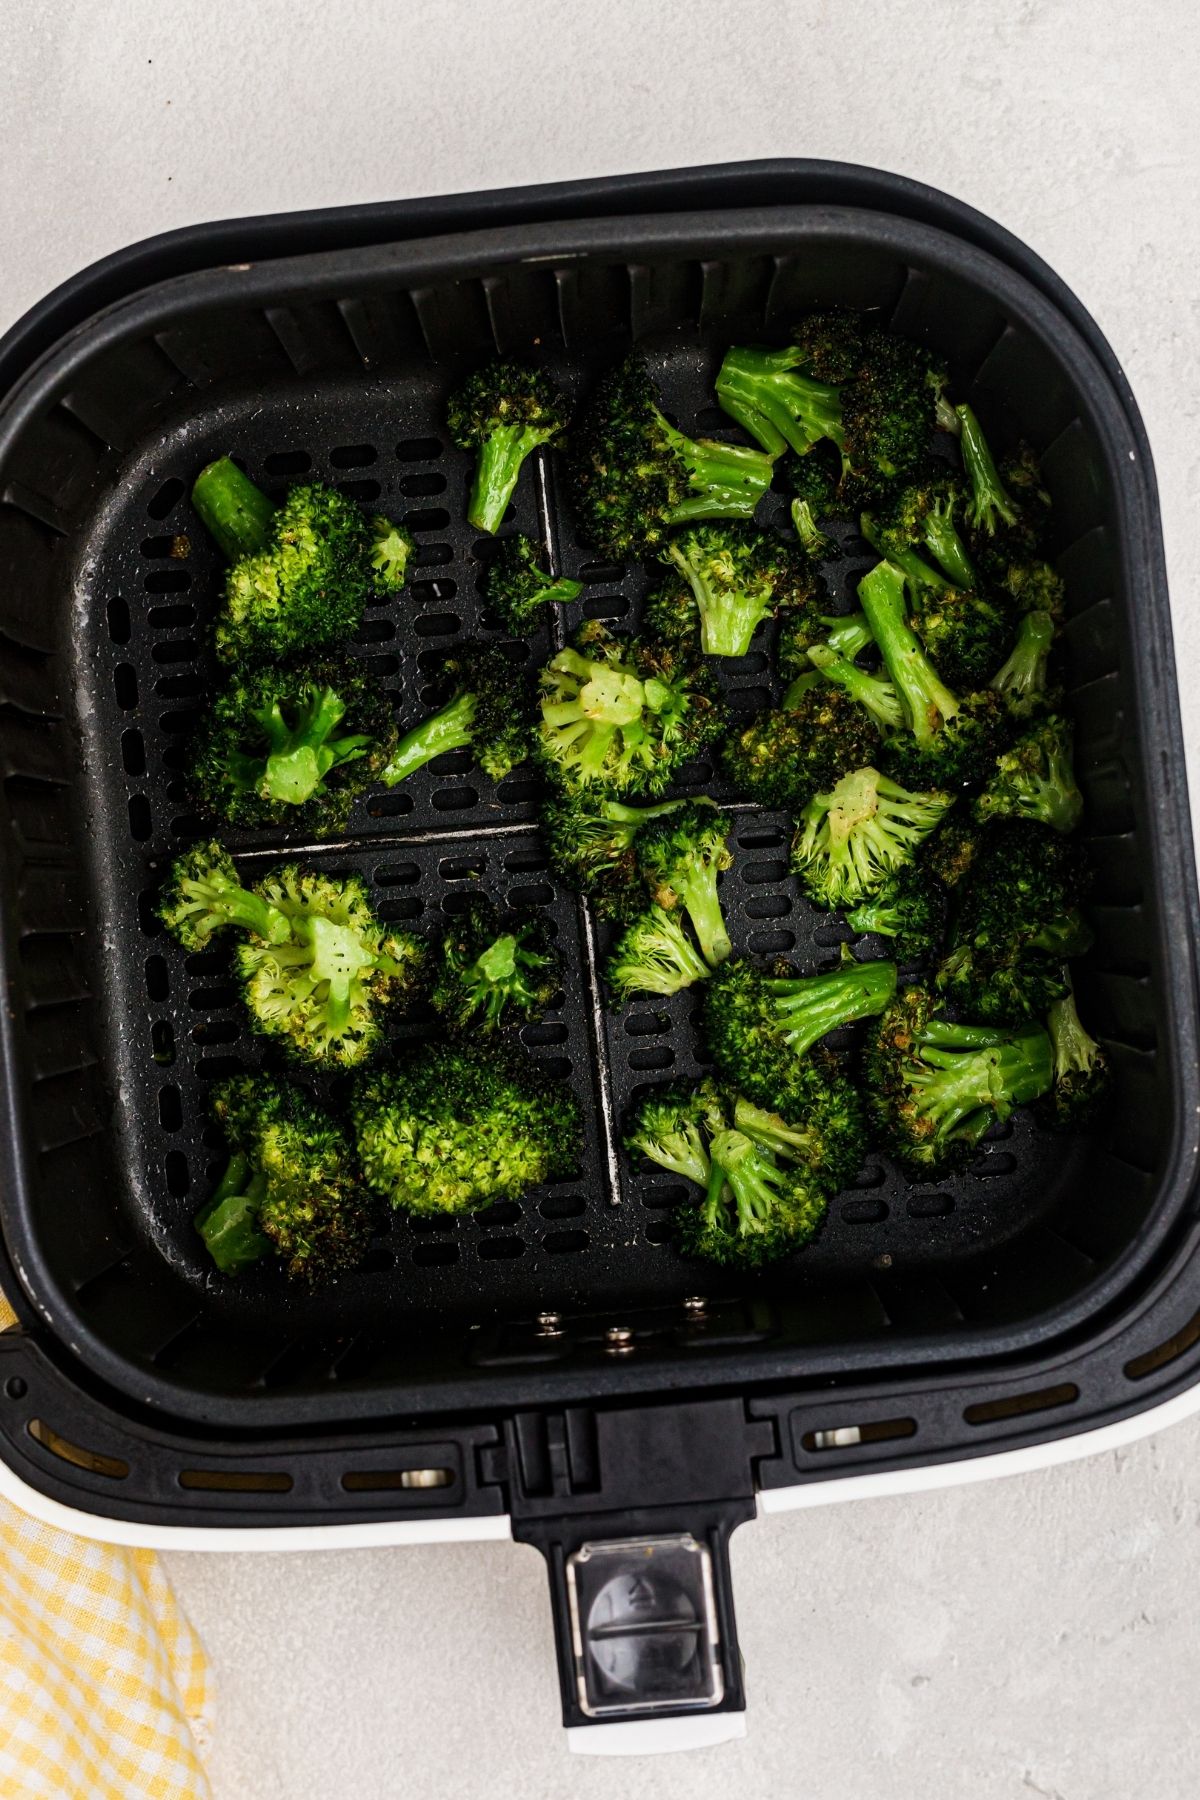 Air fried broccoli in the air fryer basket after being cooked